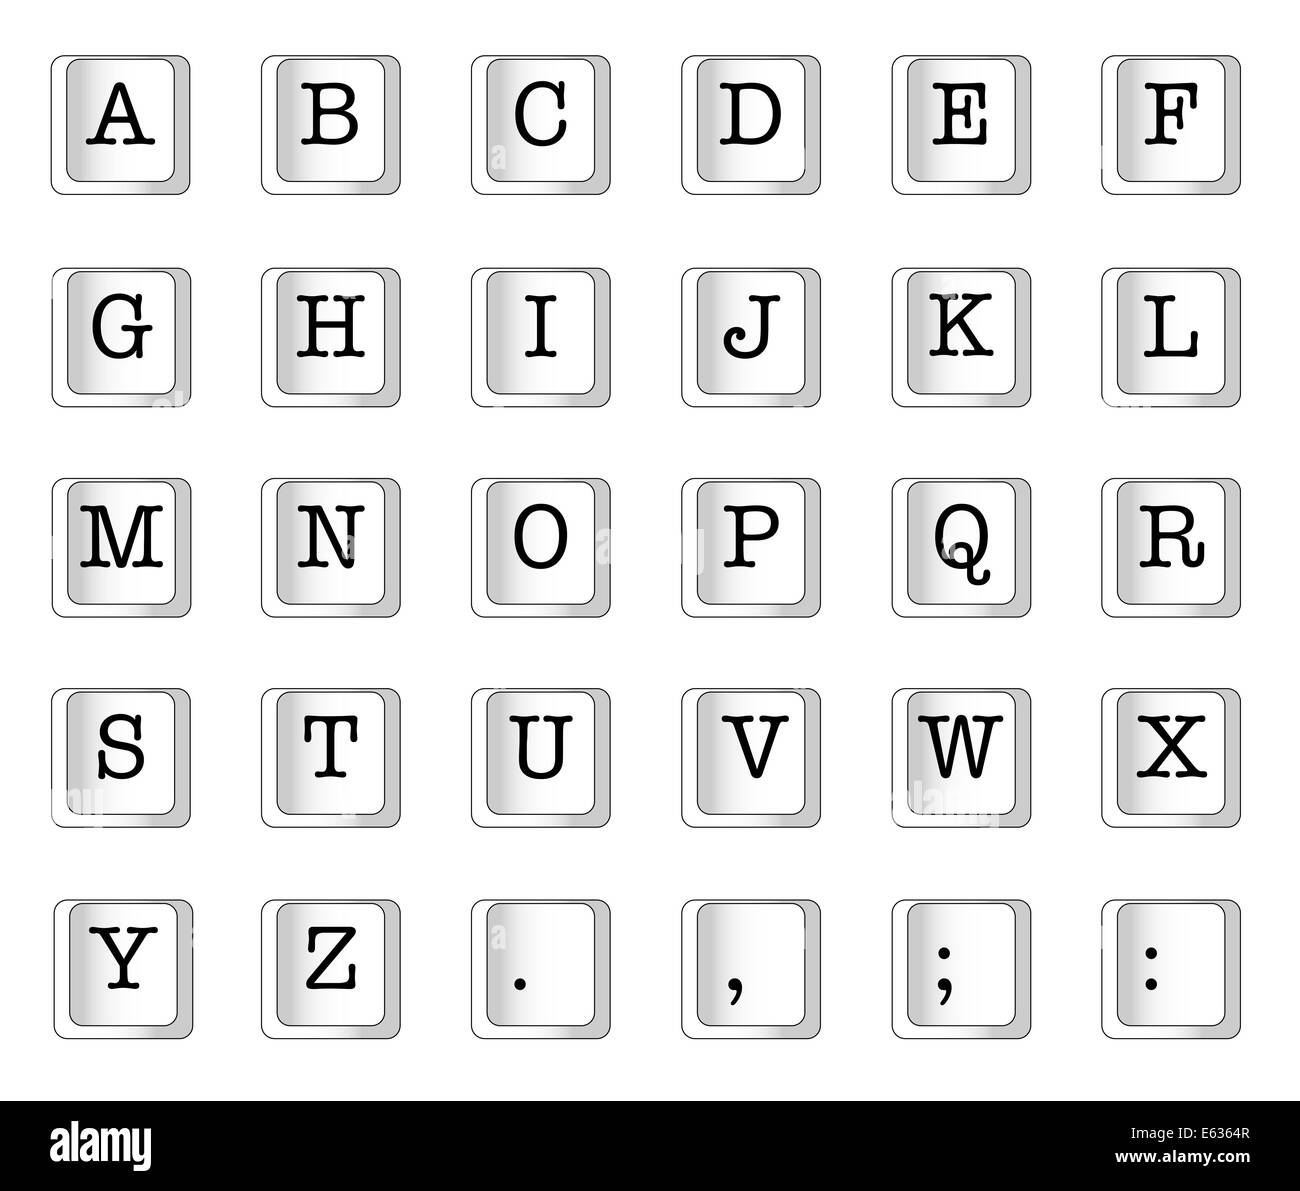 A computer key alphabet isolated on a black background Stock Photo